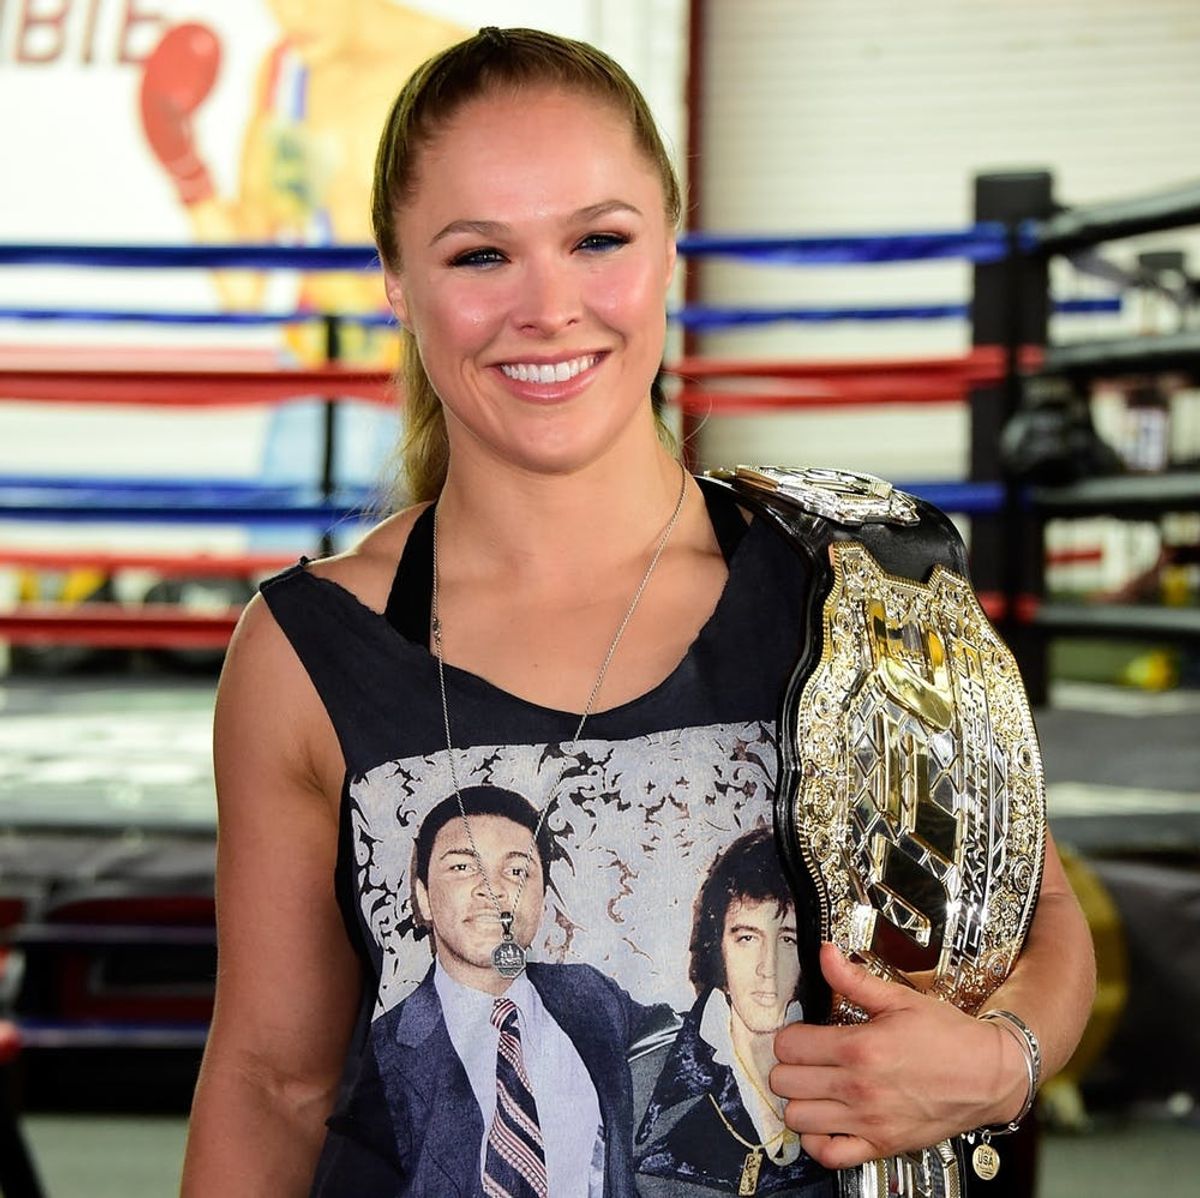 MMA Fighter Ronda Rousey Just Celebrated an Intimate Hawaiian Wedding to Fellow Fighter, Travis Browne